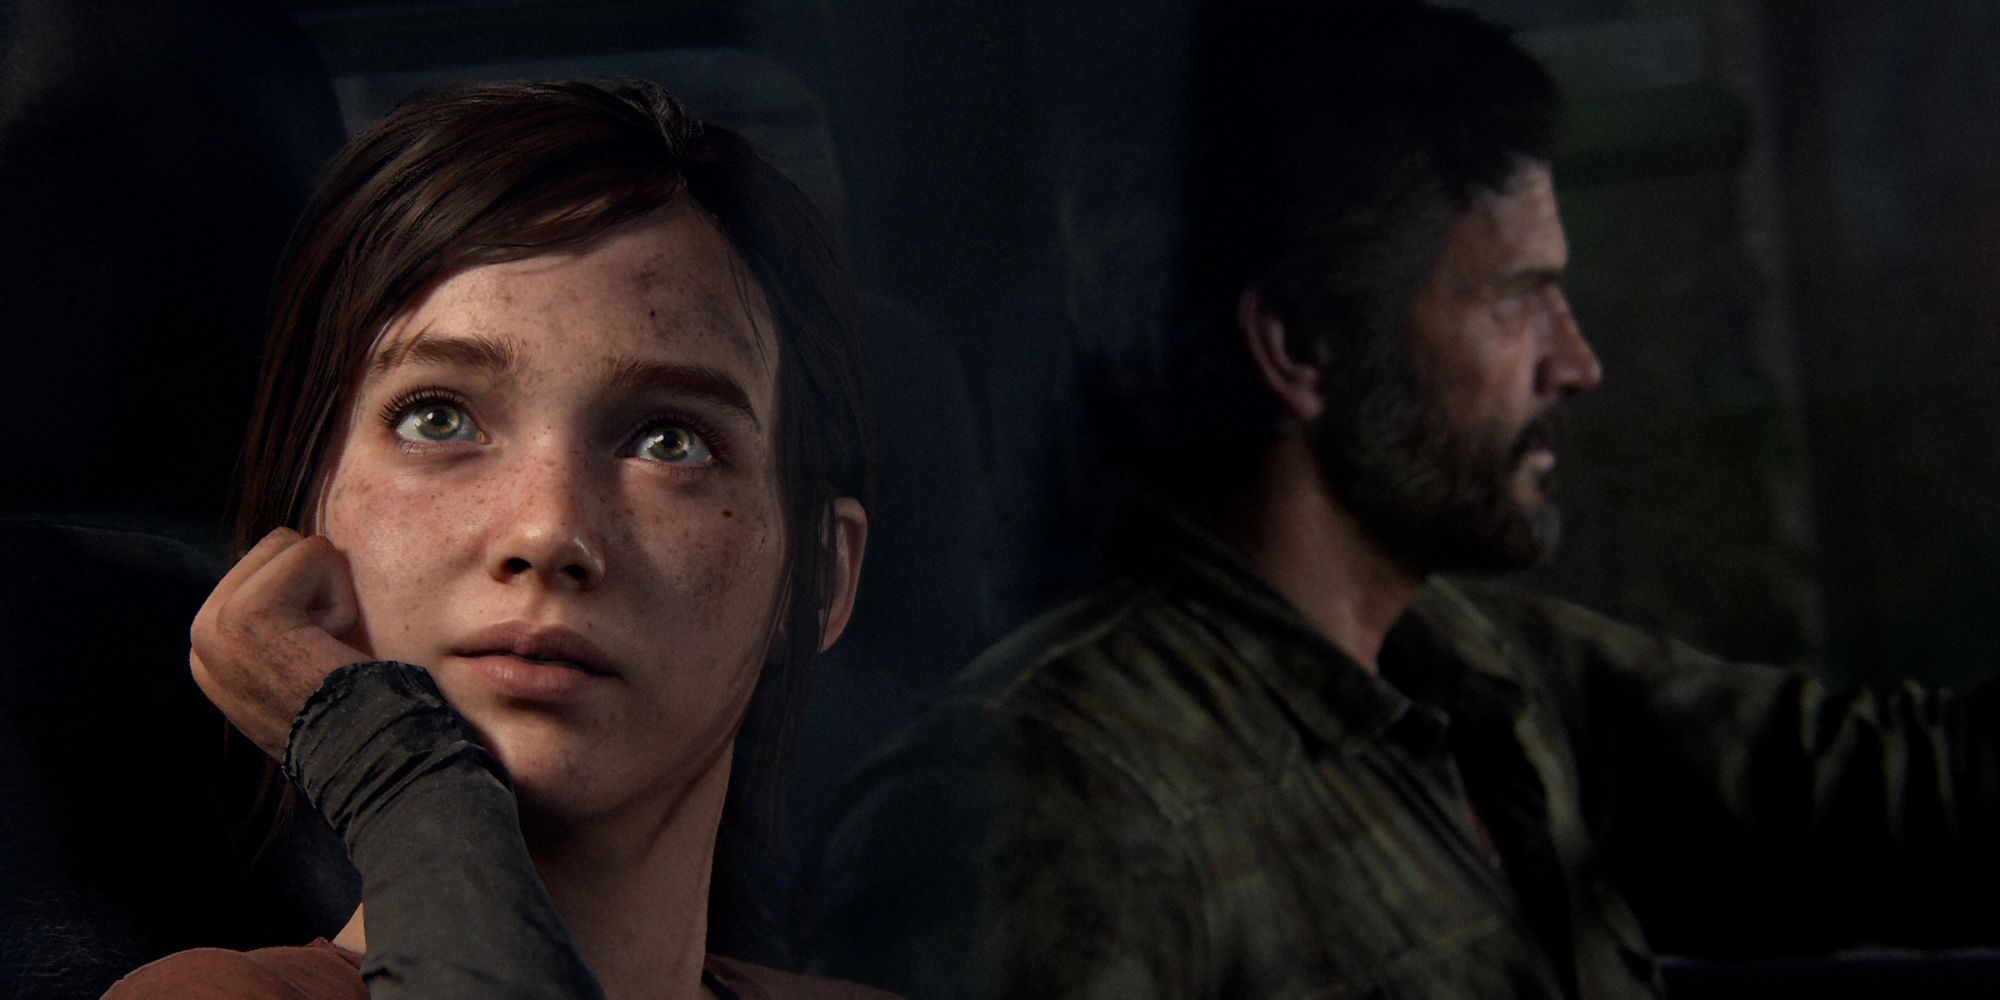 Joel and Ellie of The Last Of Us sitting in a conversation.